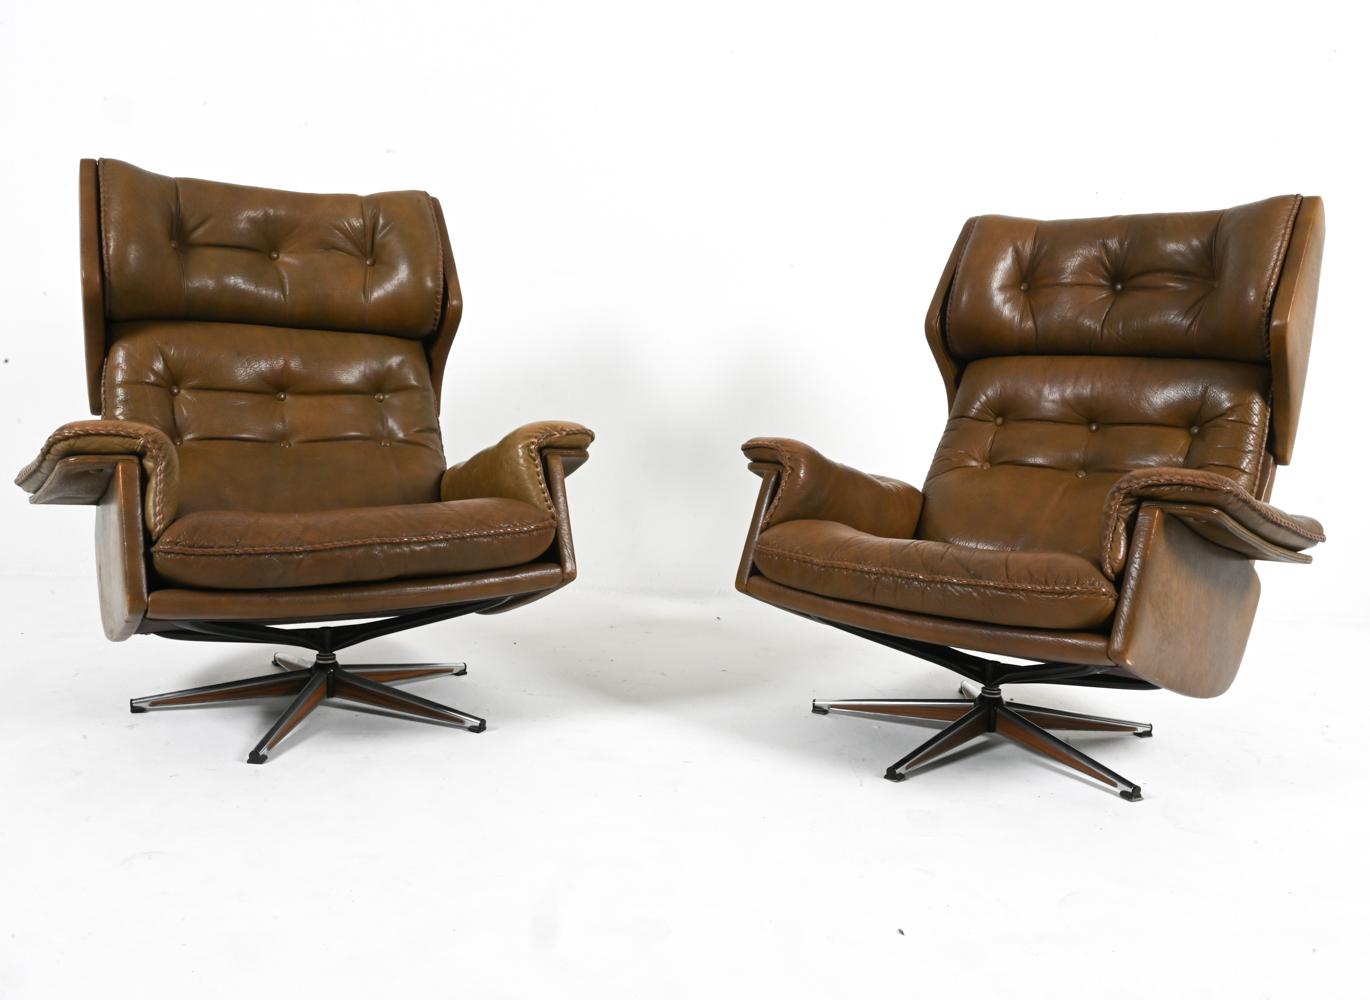 Immerse yourself in Scandinavian comfort and style with this exquisite pair of swivel armchairs by notable Swedish designer Arne Norell. Crafted from rich and supple buffalo leather, these chairs exude an aura of timeless elegance. The deep,